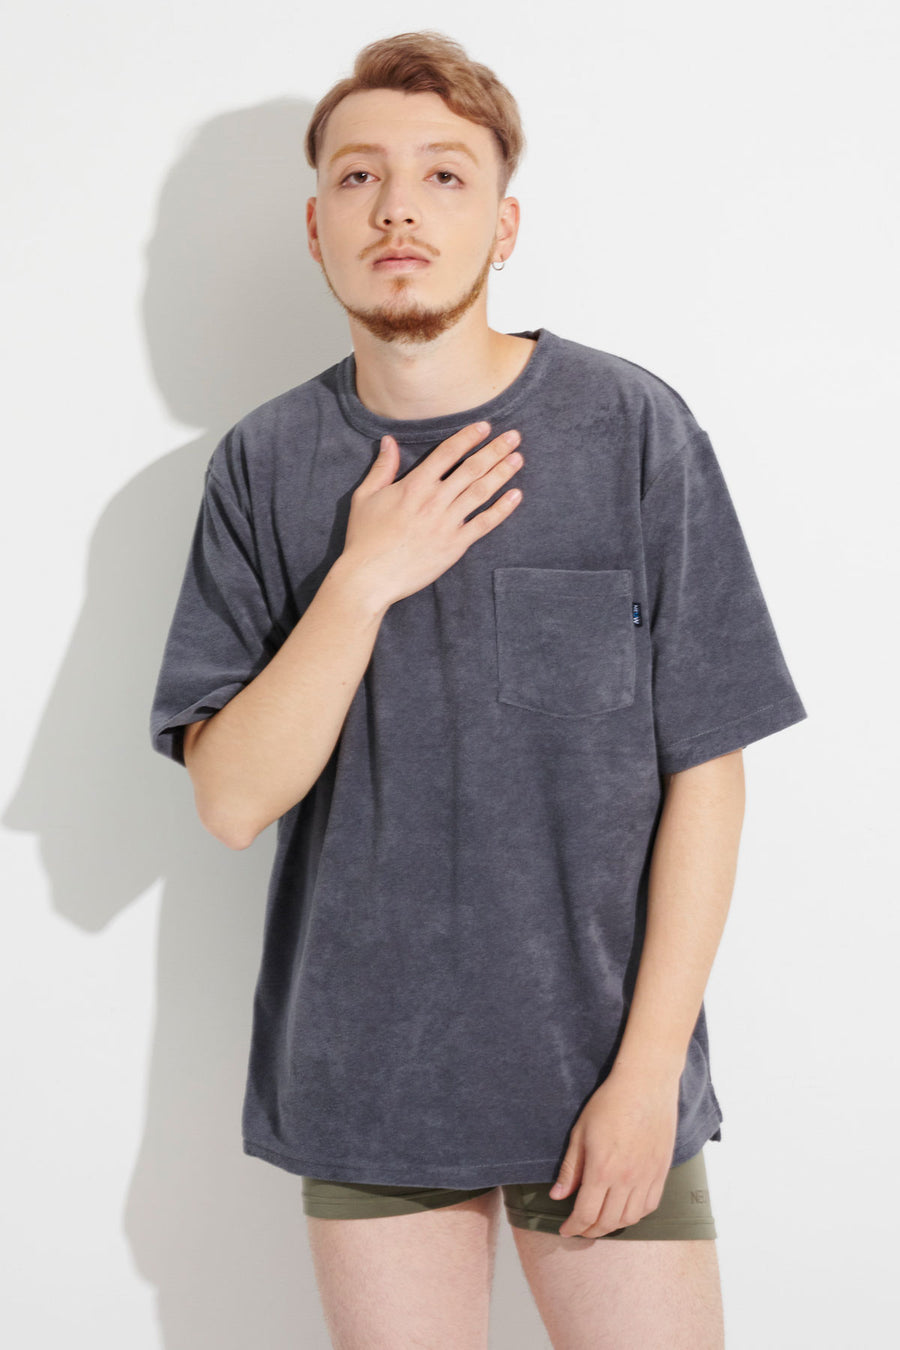 Relux T-SHIRT（PILE）Chacoal Gray [New ITEM]